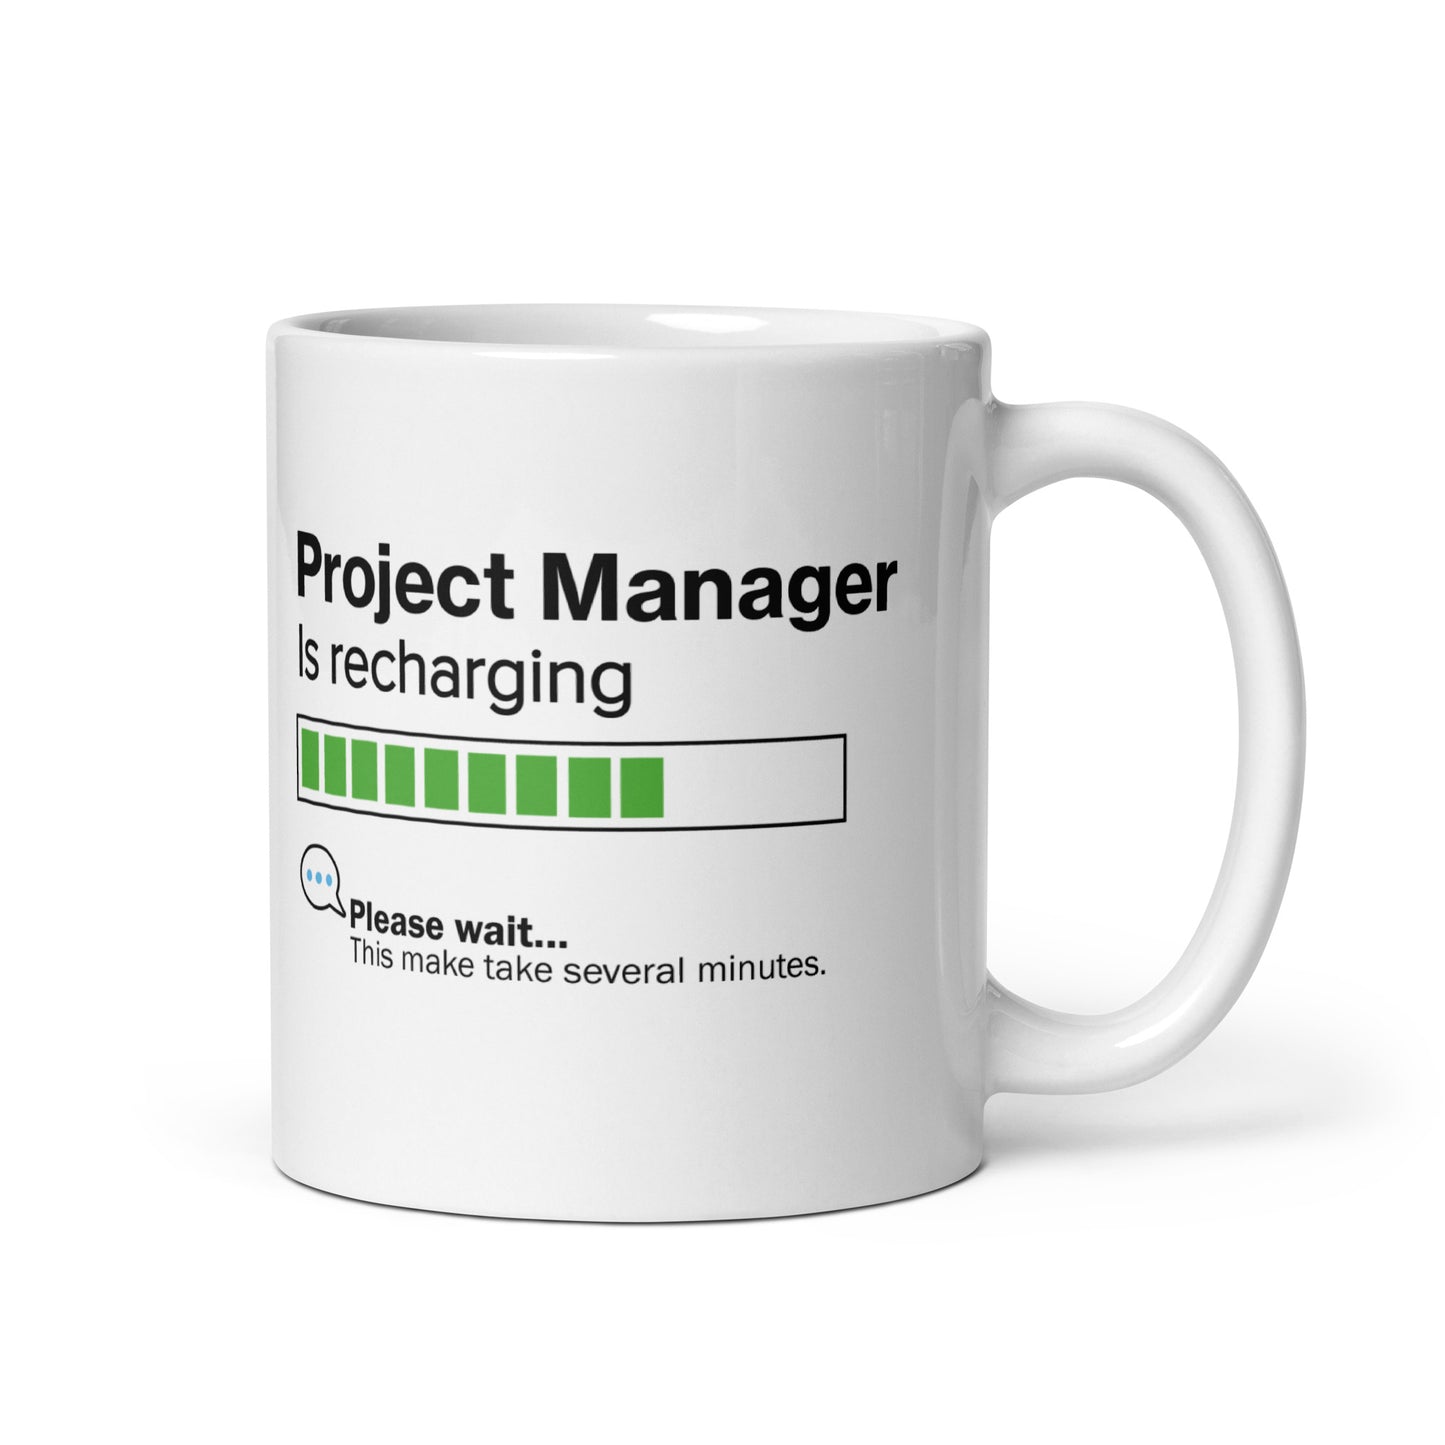 Project Manager Is Recharging Mug - 11oz - Great Gift for Project Managers